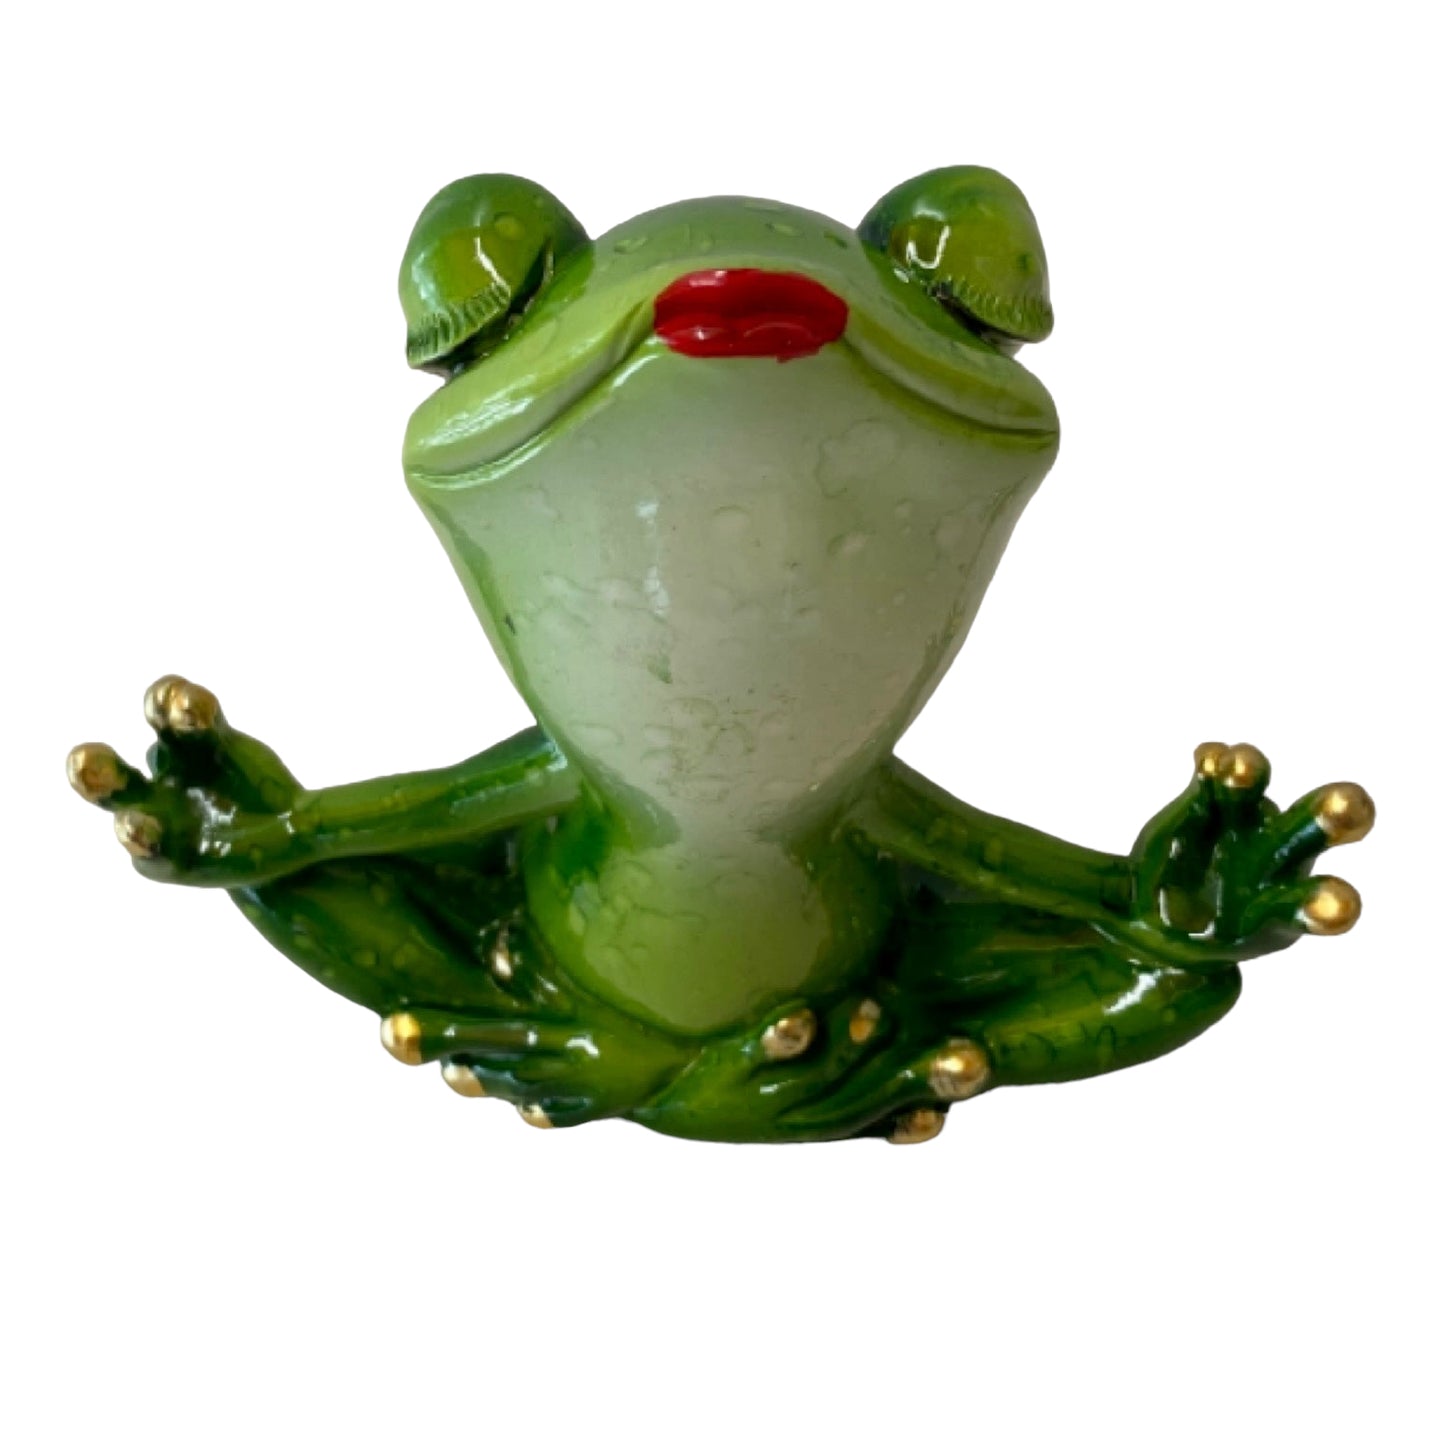 Frog Meditate Zen Yoga Ornament - The Renmy Store Homewares & Gifts 